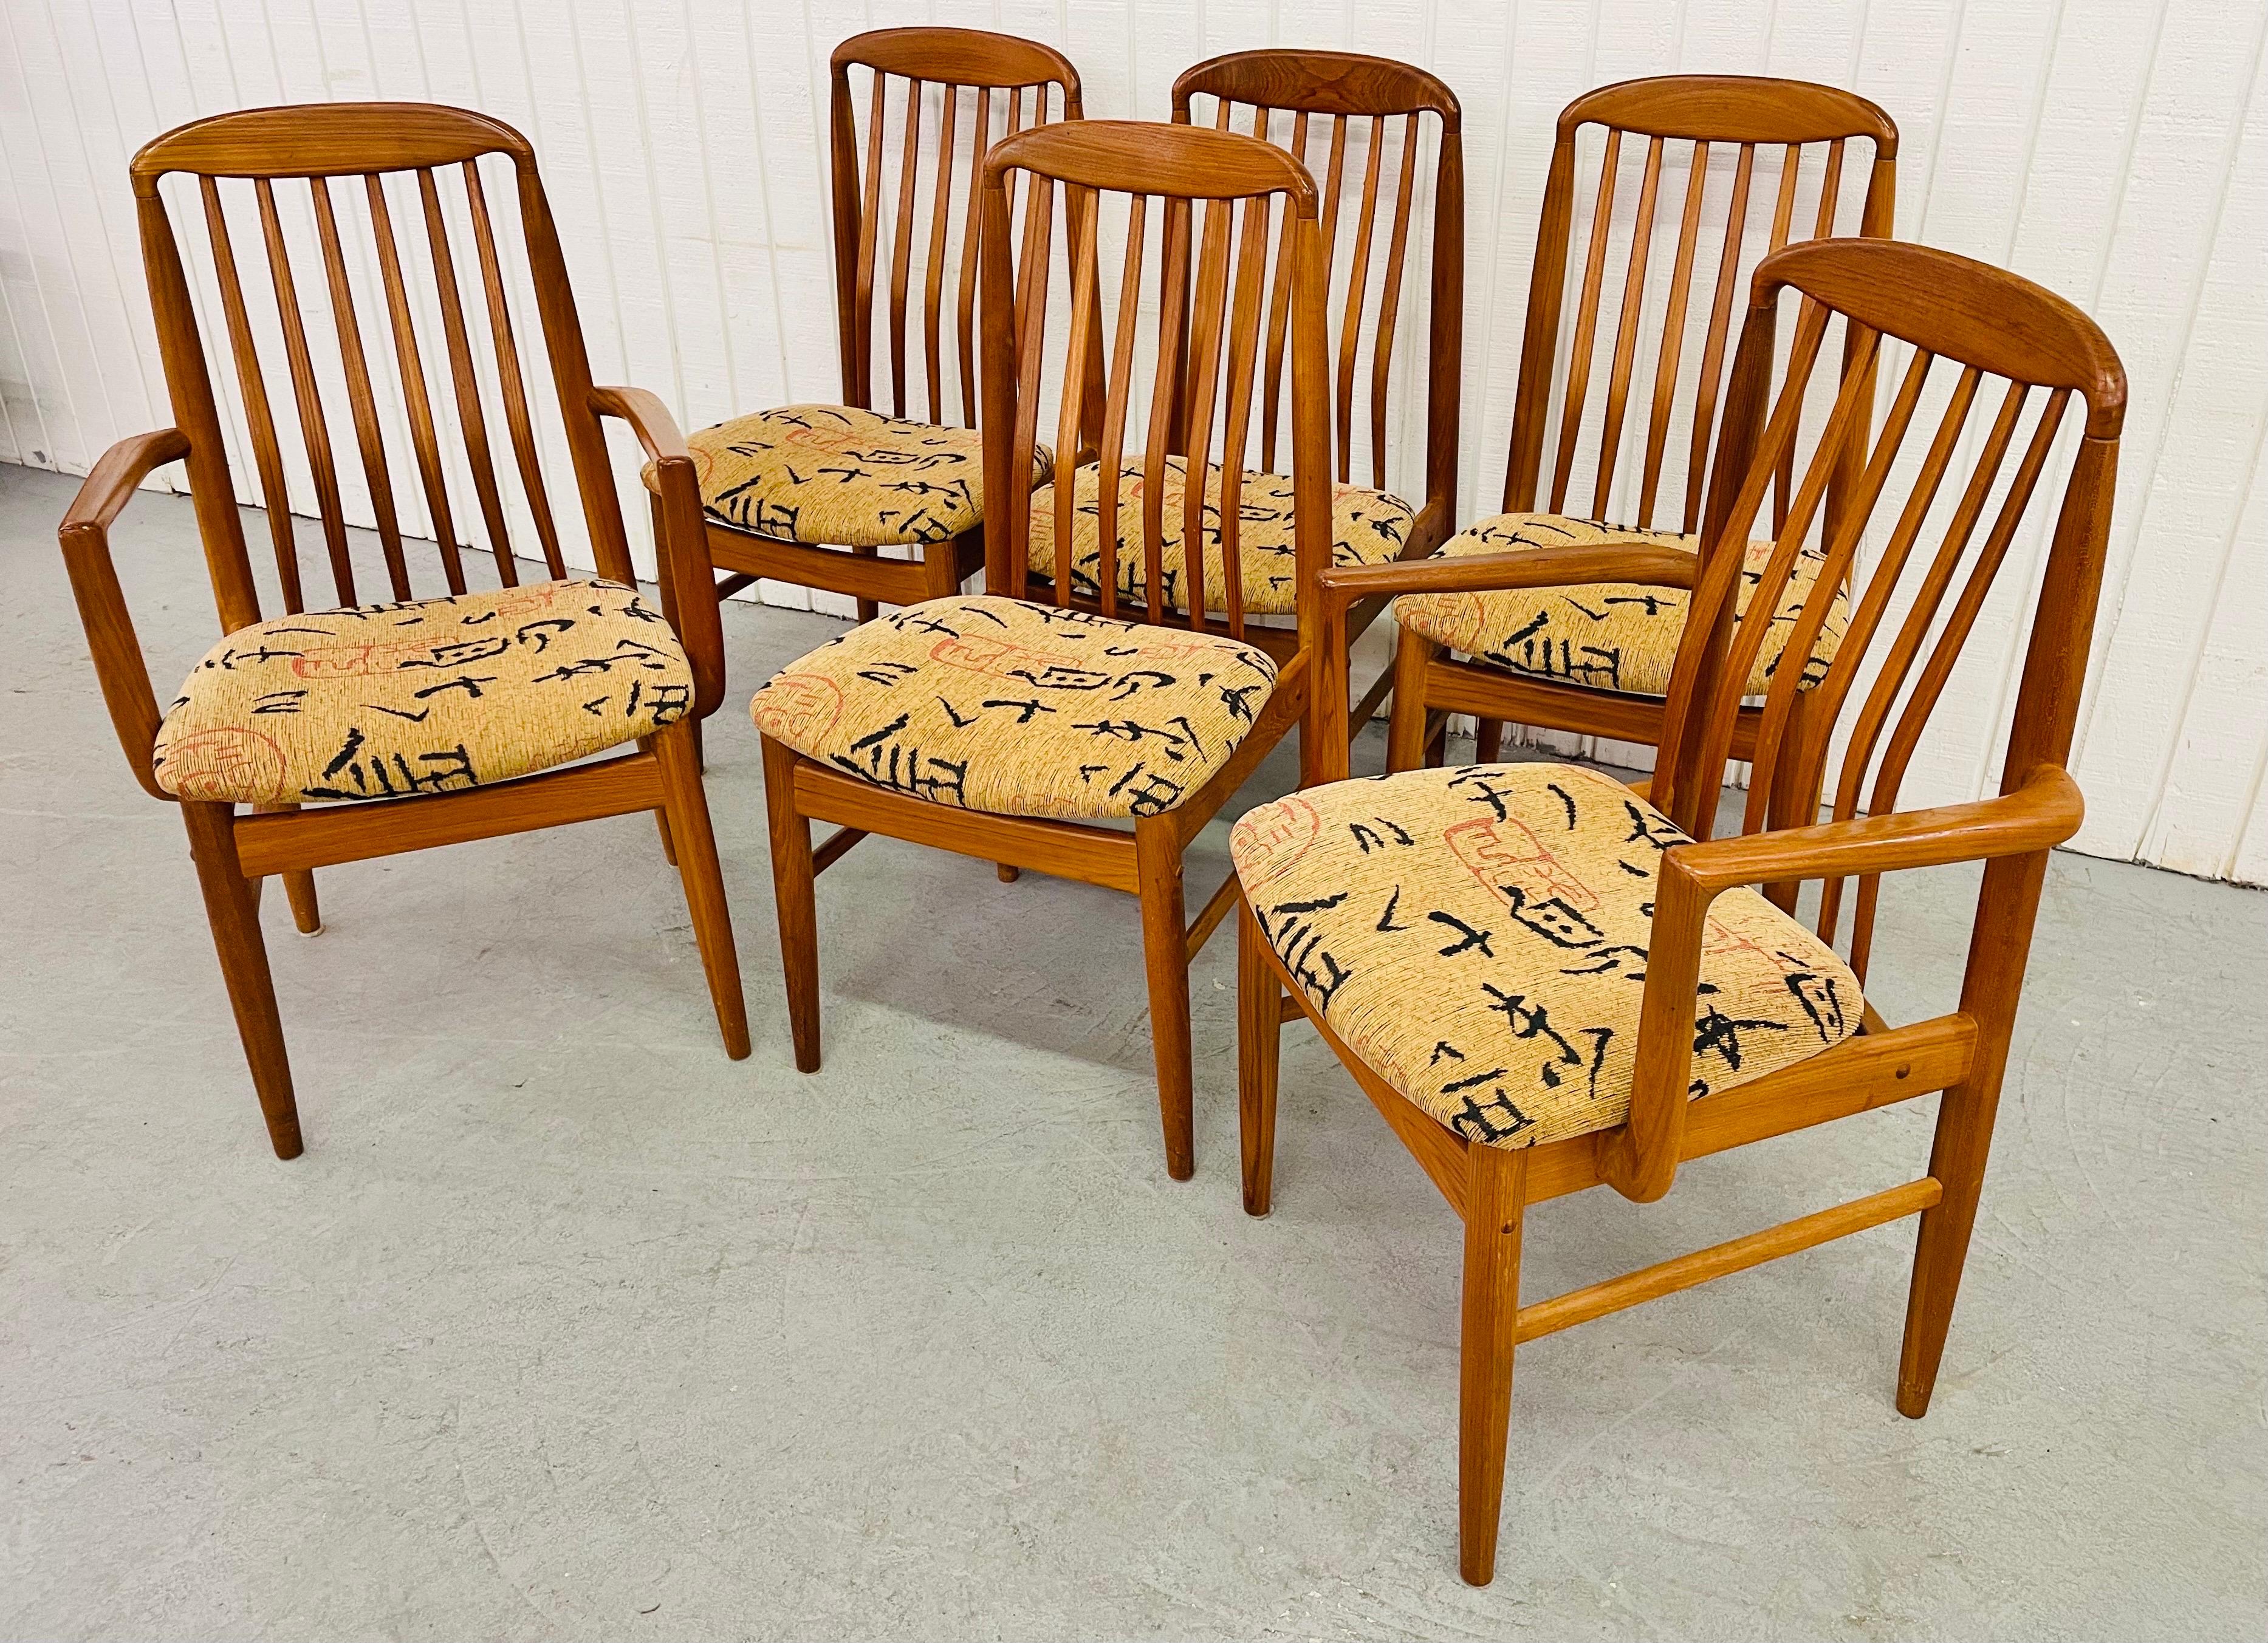 This listing is for a set of six vintage Danish Modern Teak Dining Chairs. Featuring two arm chairs, four straight chairs, original upholstery, and a beautiful teak finish.